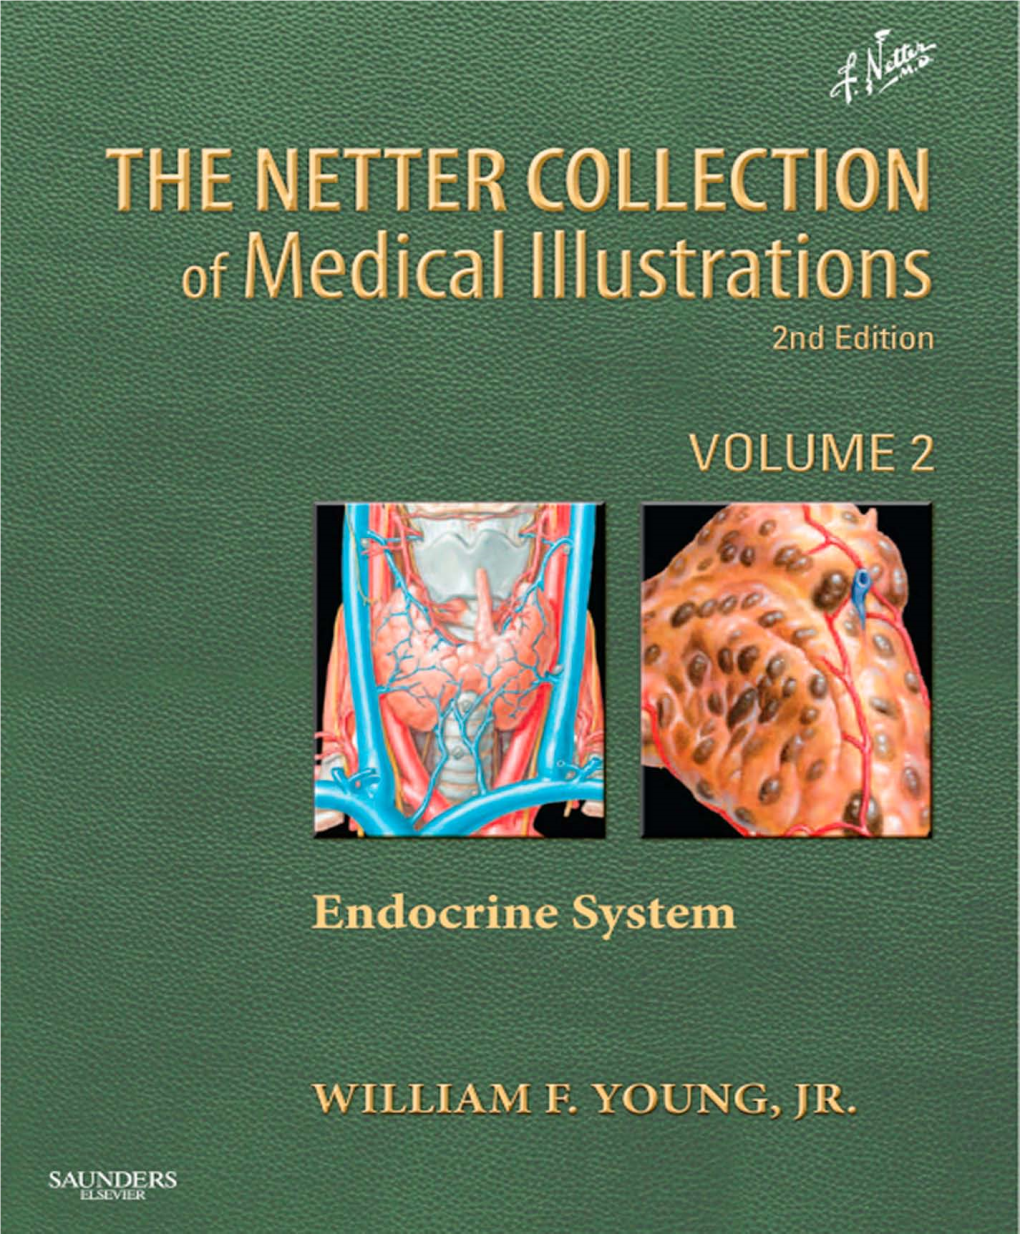 The Netter Collection of MEDICAL ILLUSTRATIONS: Endocrine System Second Edition